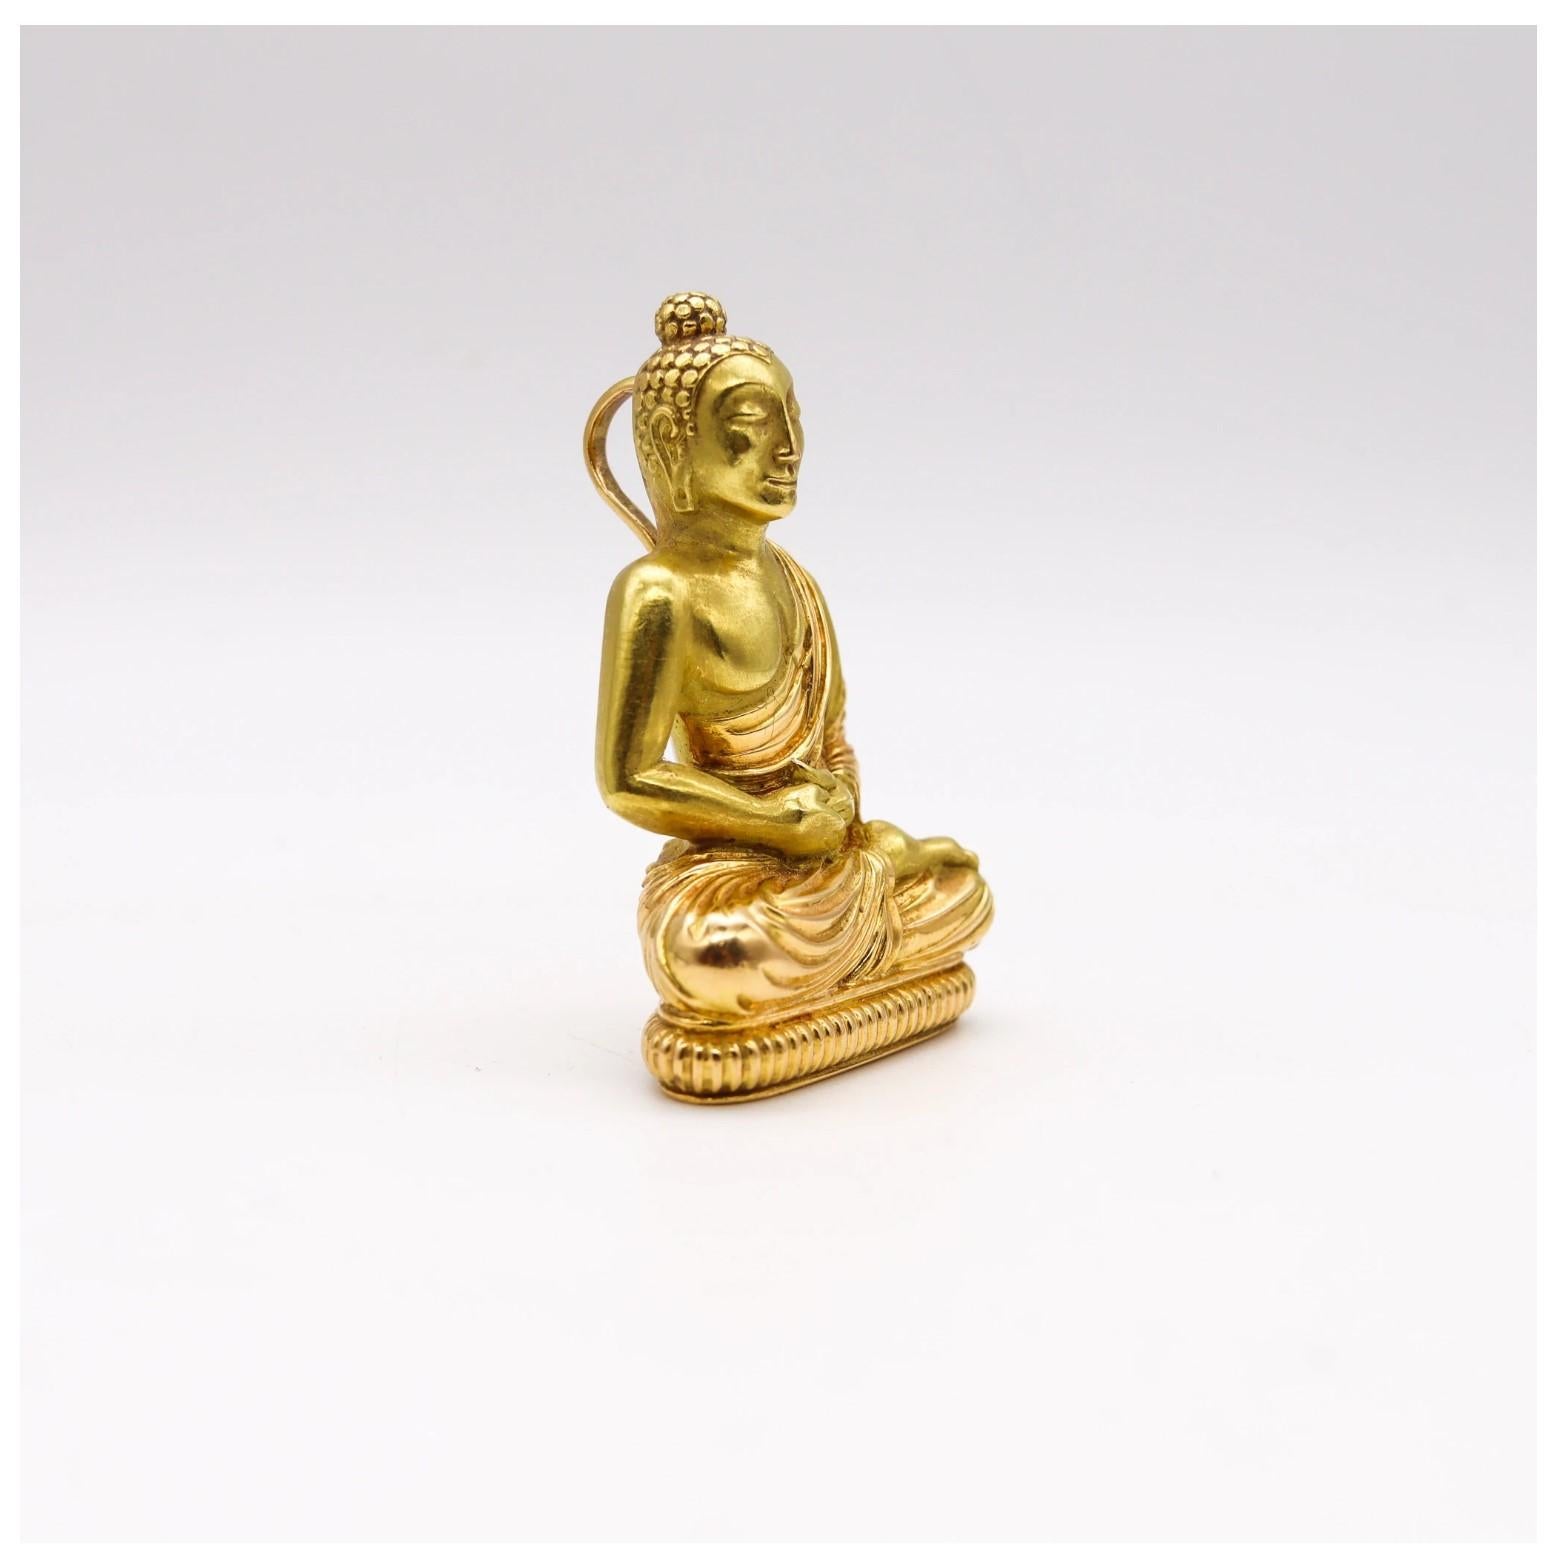 French pendant with a seated meditating Buddha.

Very unusual and elusive piece, created in Paris France, back in the early 1970's. This beautiful seated Buddha pendant has been carefully crafted in solid yellow gold of 18 karats, with brushed and